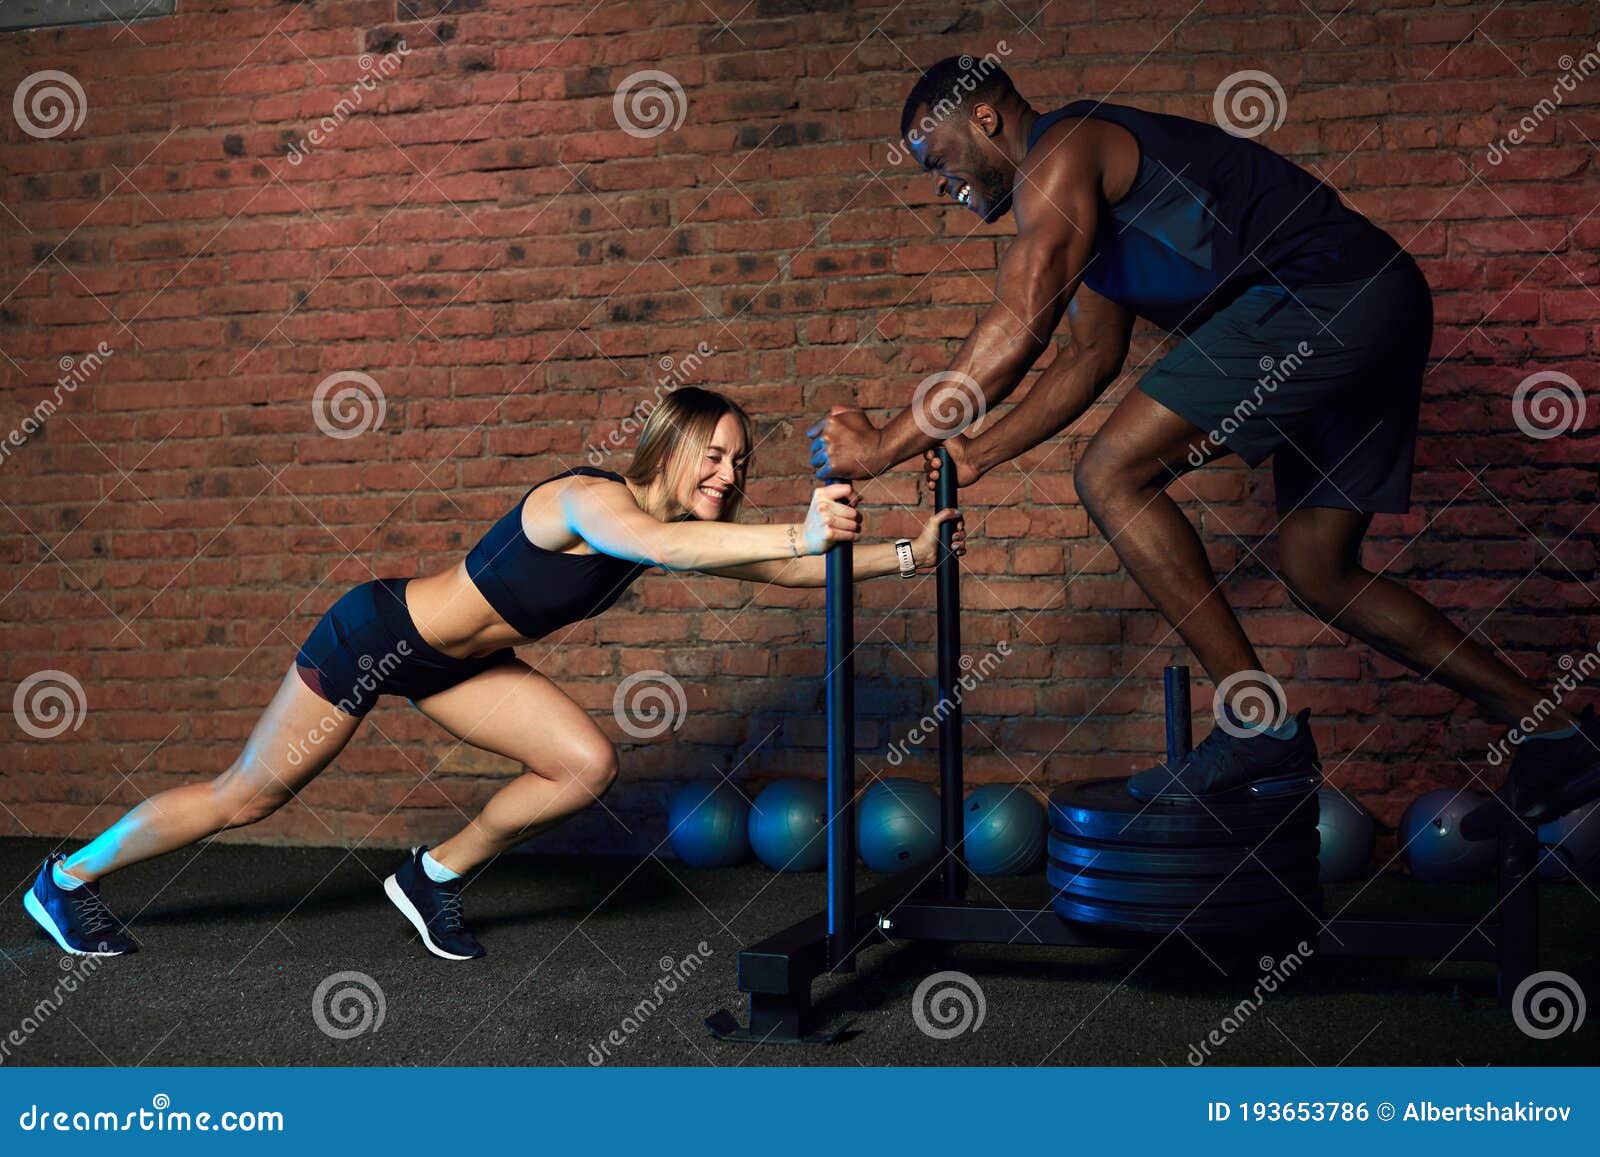 Interracial Diverse Athletes Having Crossfit Training in a Gym. Stock Photo  - Image of friendship, caucasian: 193653786